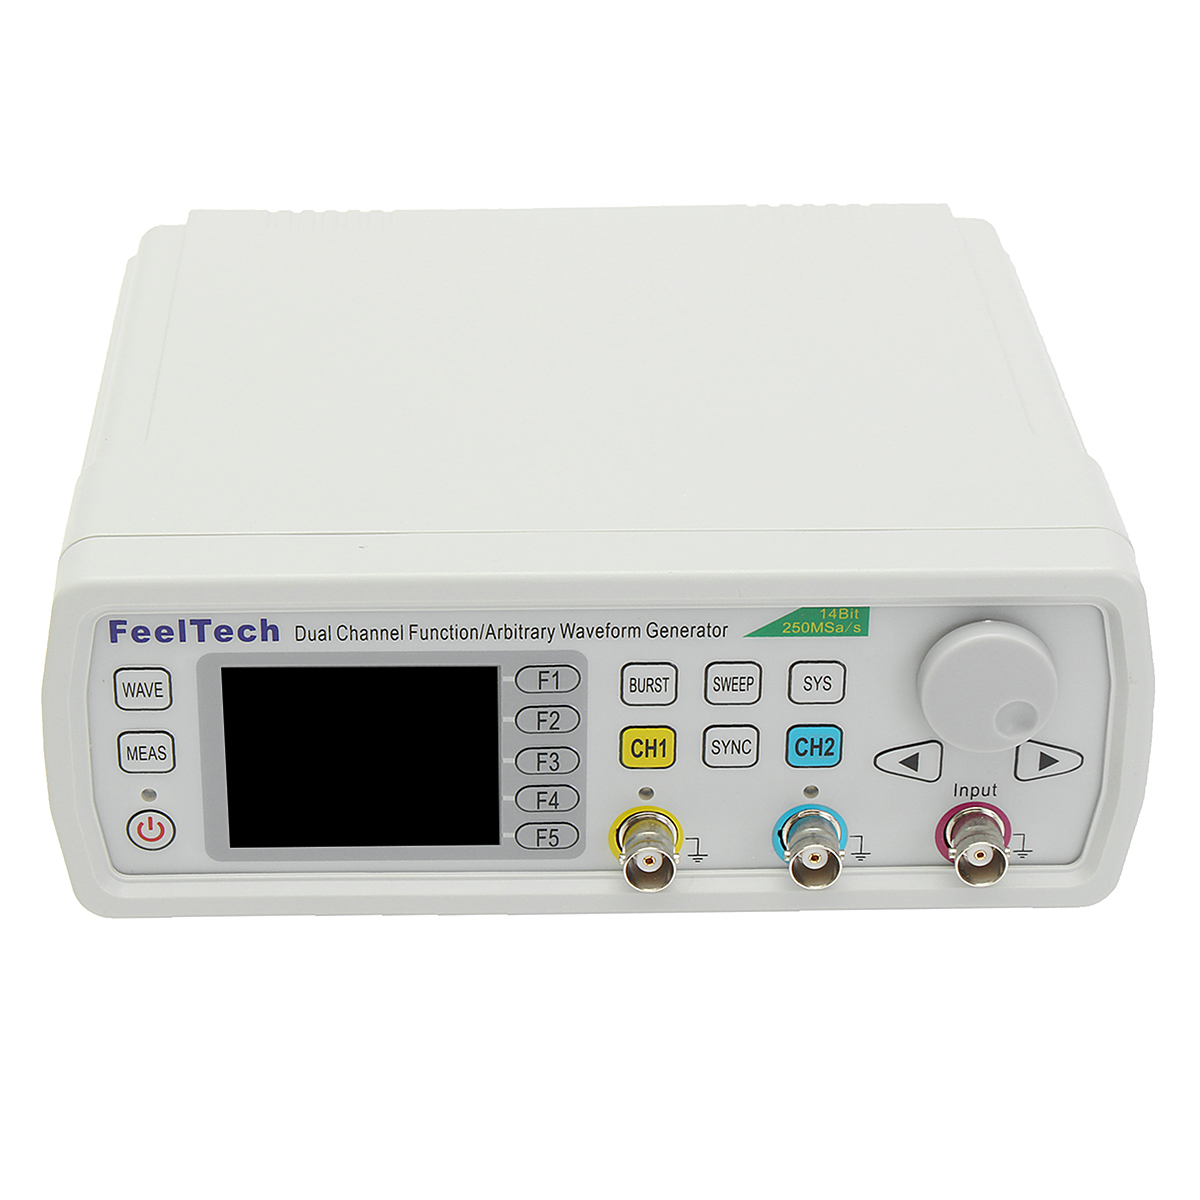 FY6600 Digital 12-60MHz Dual Channel DDS Function Arbitrary Waveform Signal Generator Frequency Meter 12